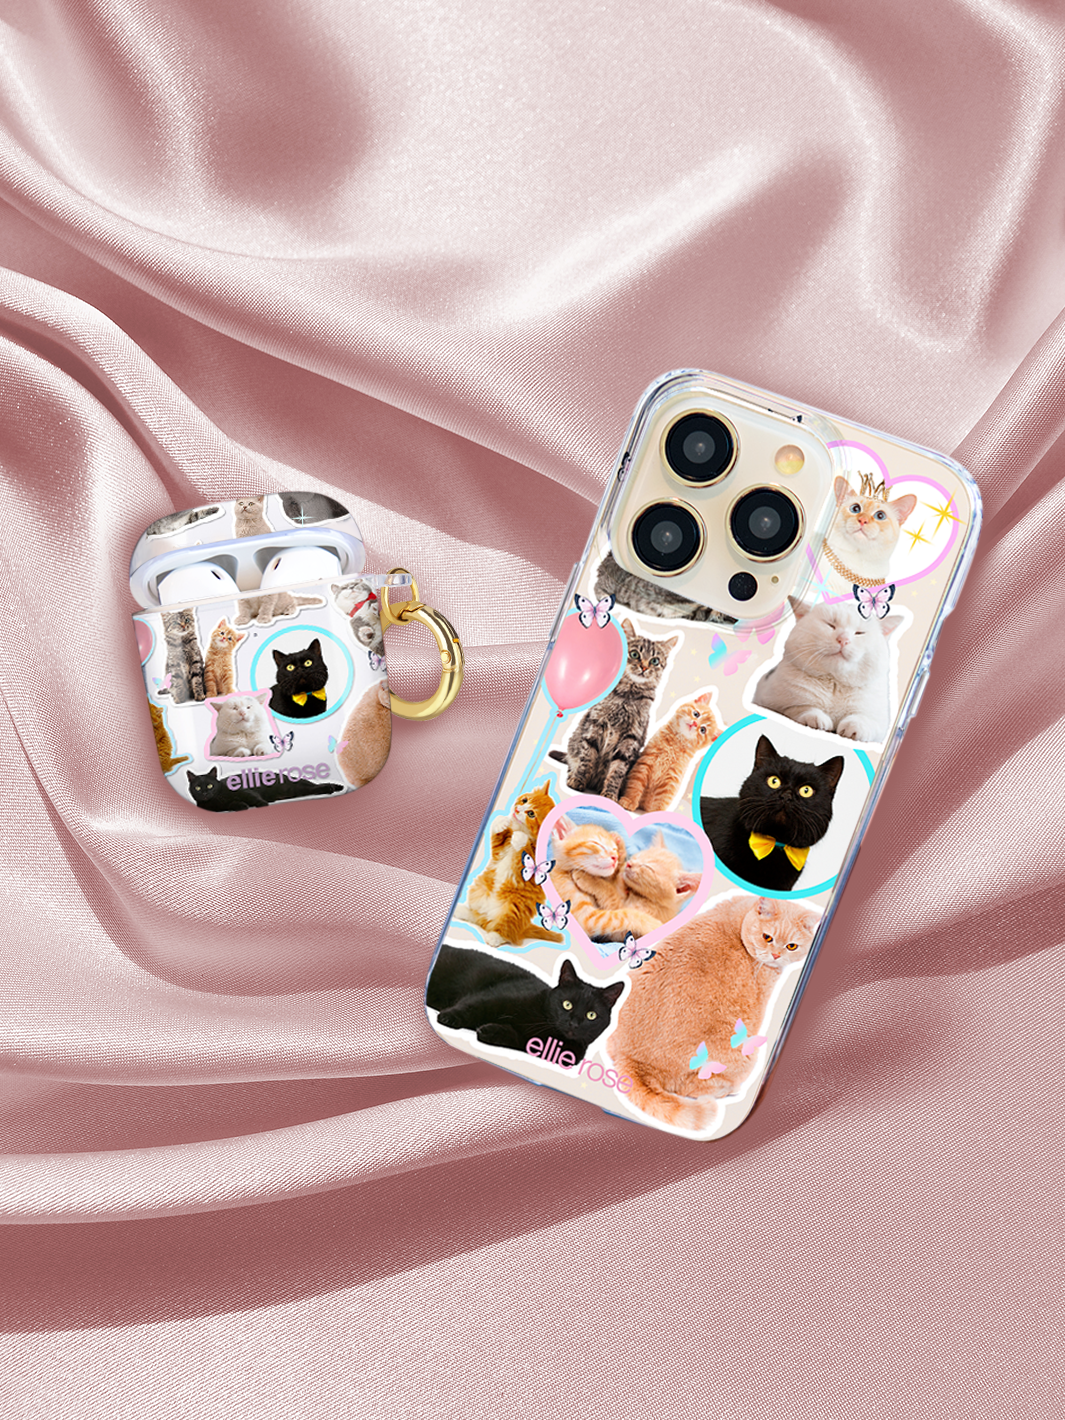 Meow Baby Airpods Case